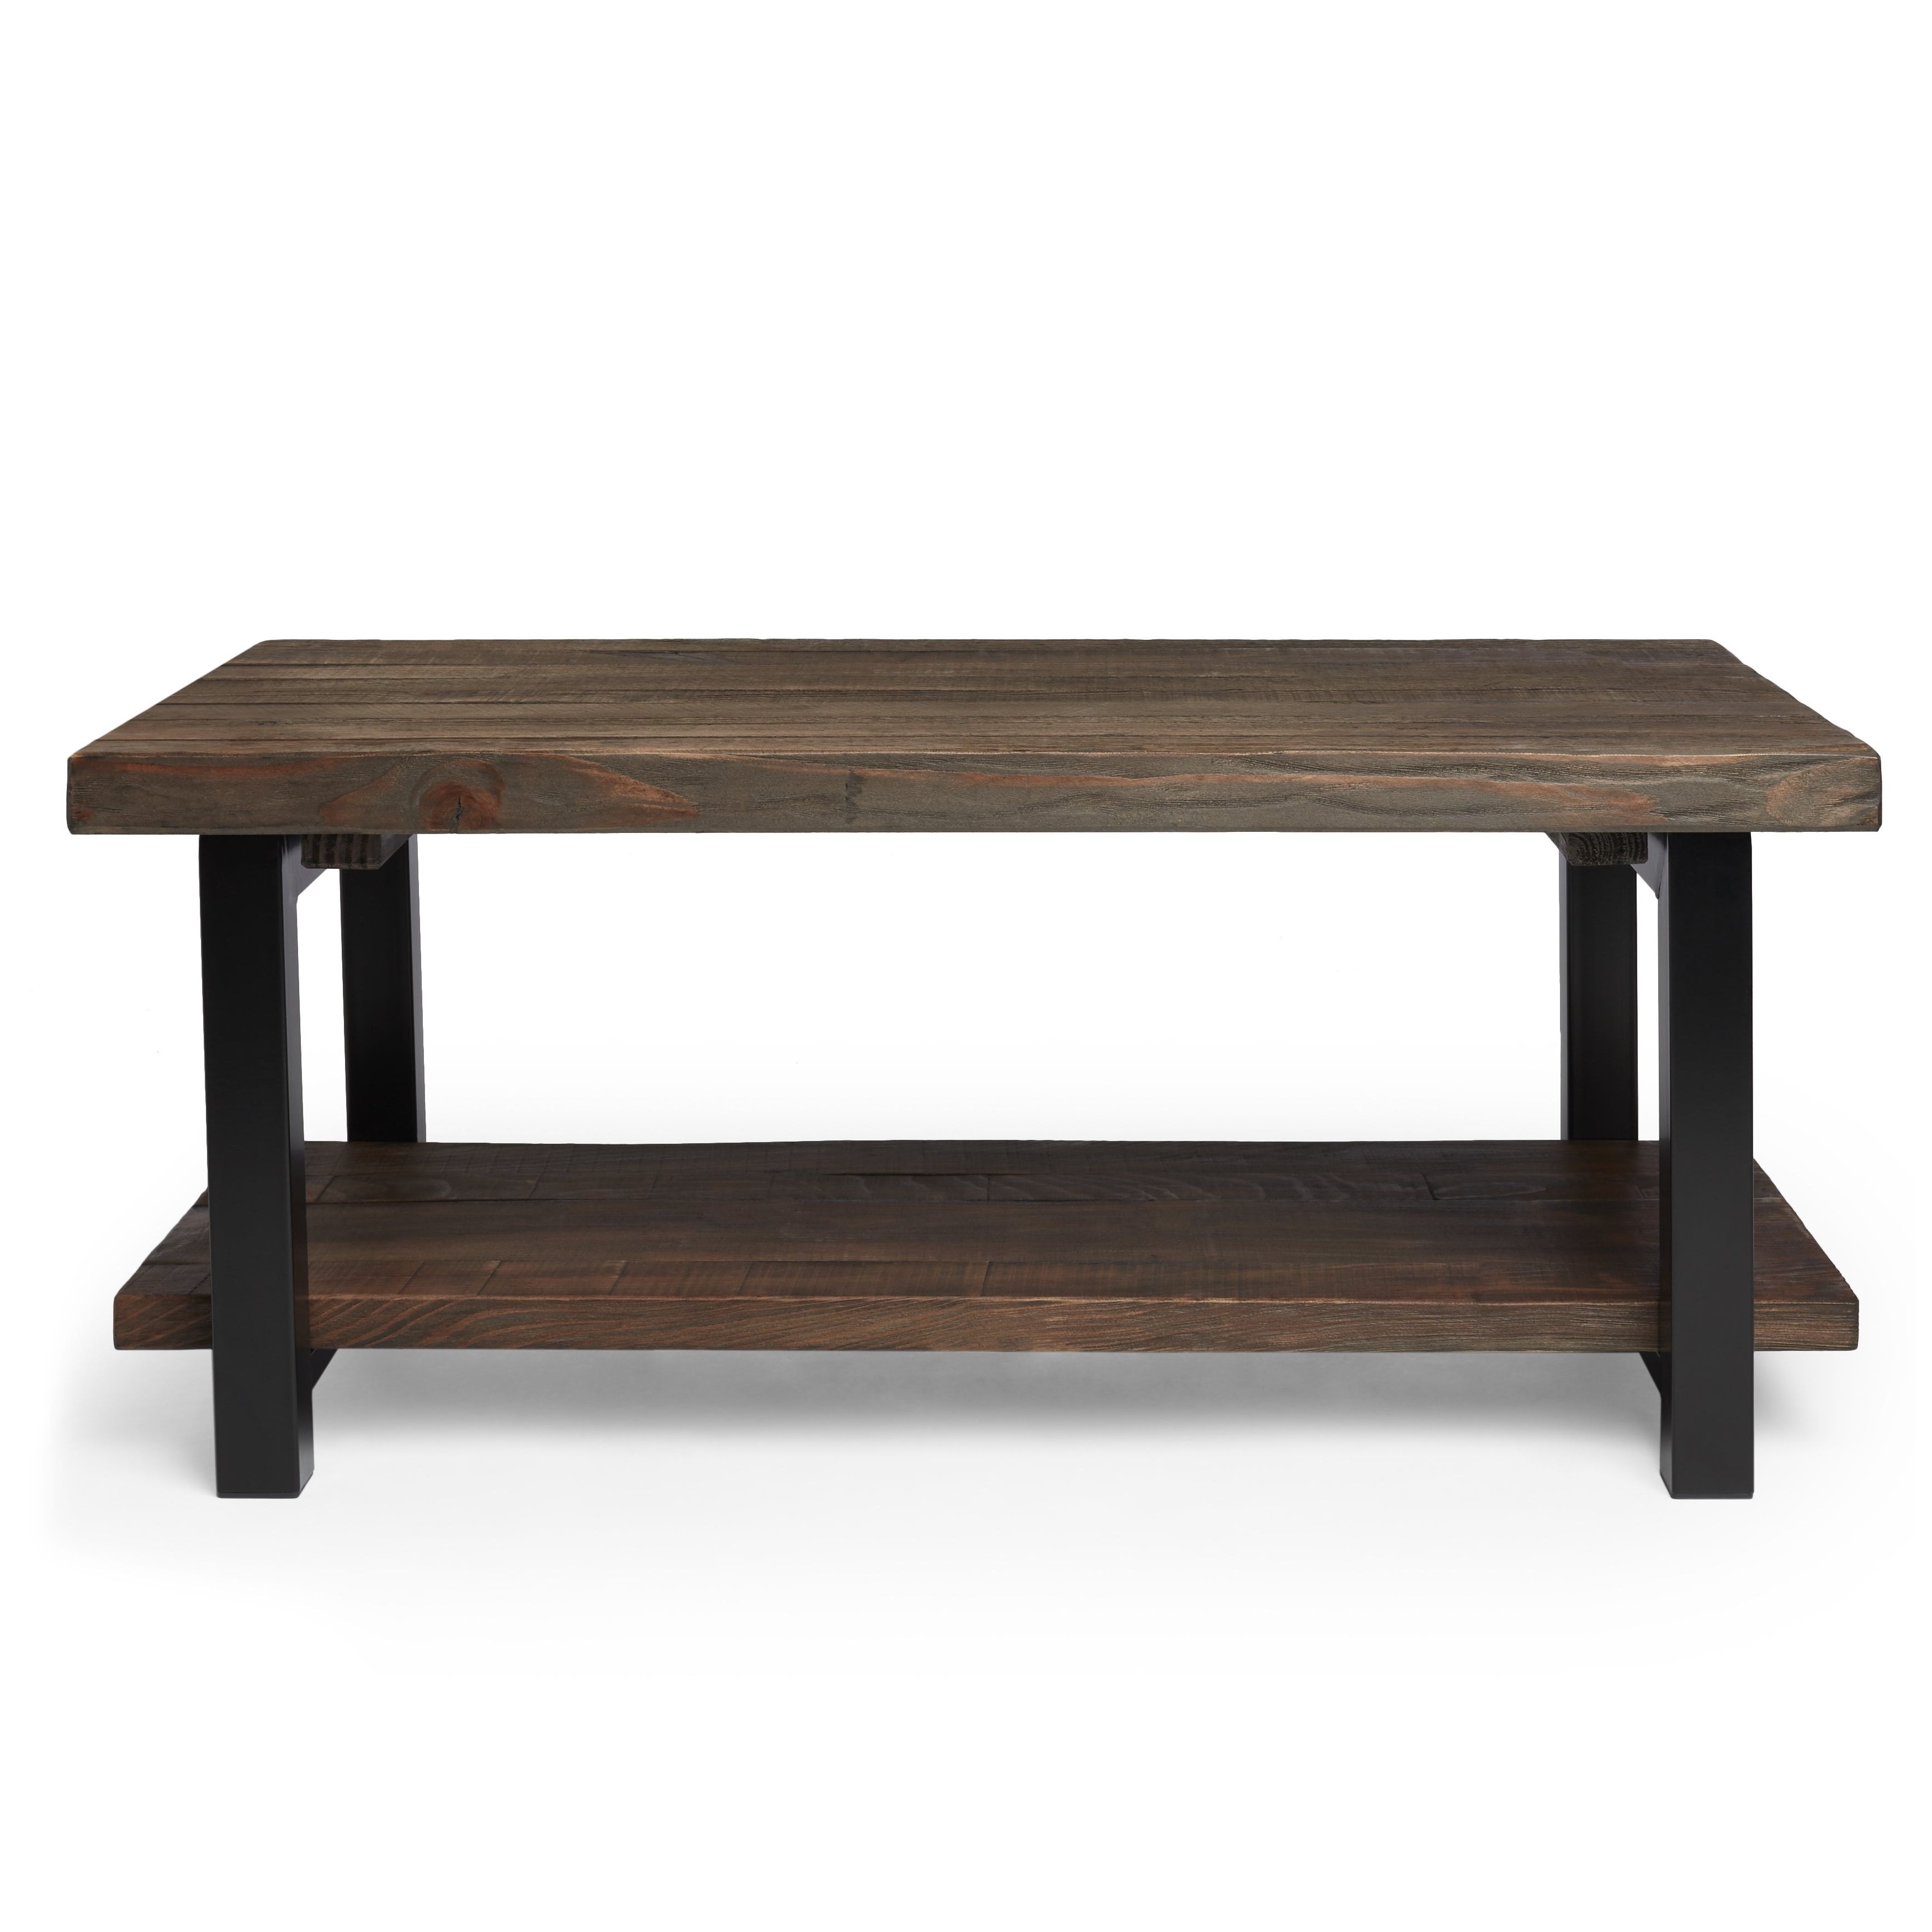 Popular Carbon Loft Lawrence Metal And Reclaimed Wood Coffee Tables In Carbon Loft Lawrence Reclaimed Wood 42 Inch Coffee Table (View 4 of 20)